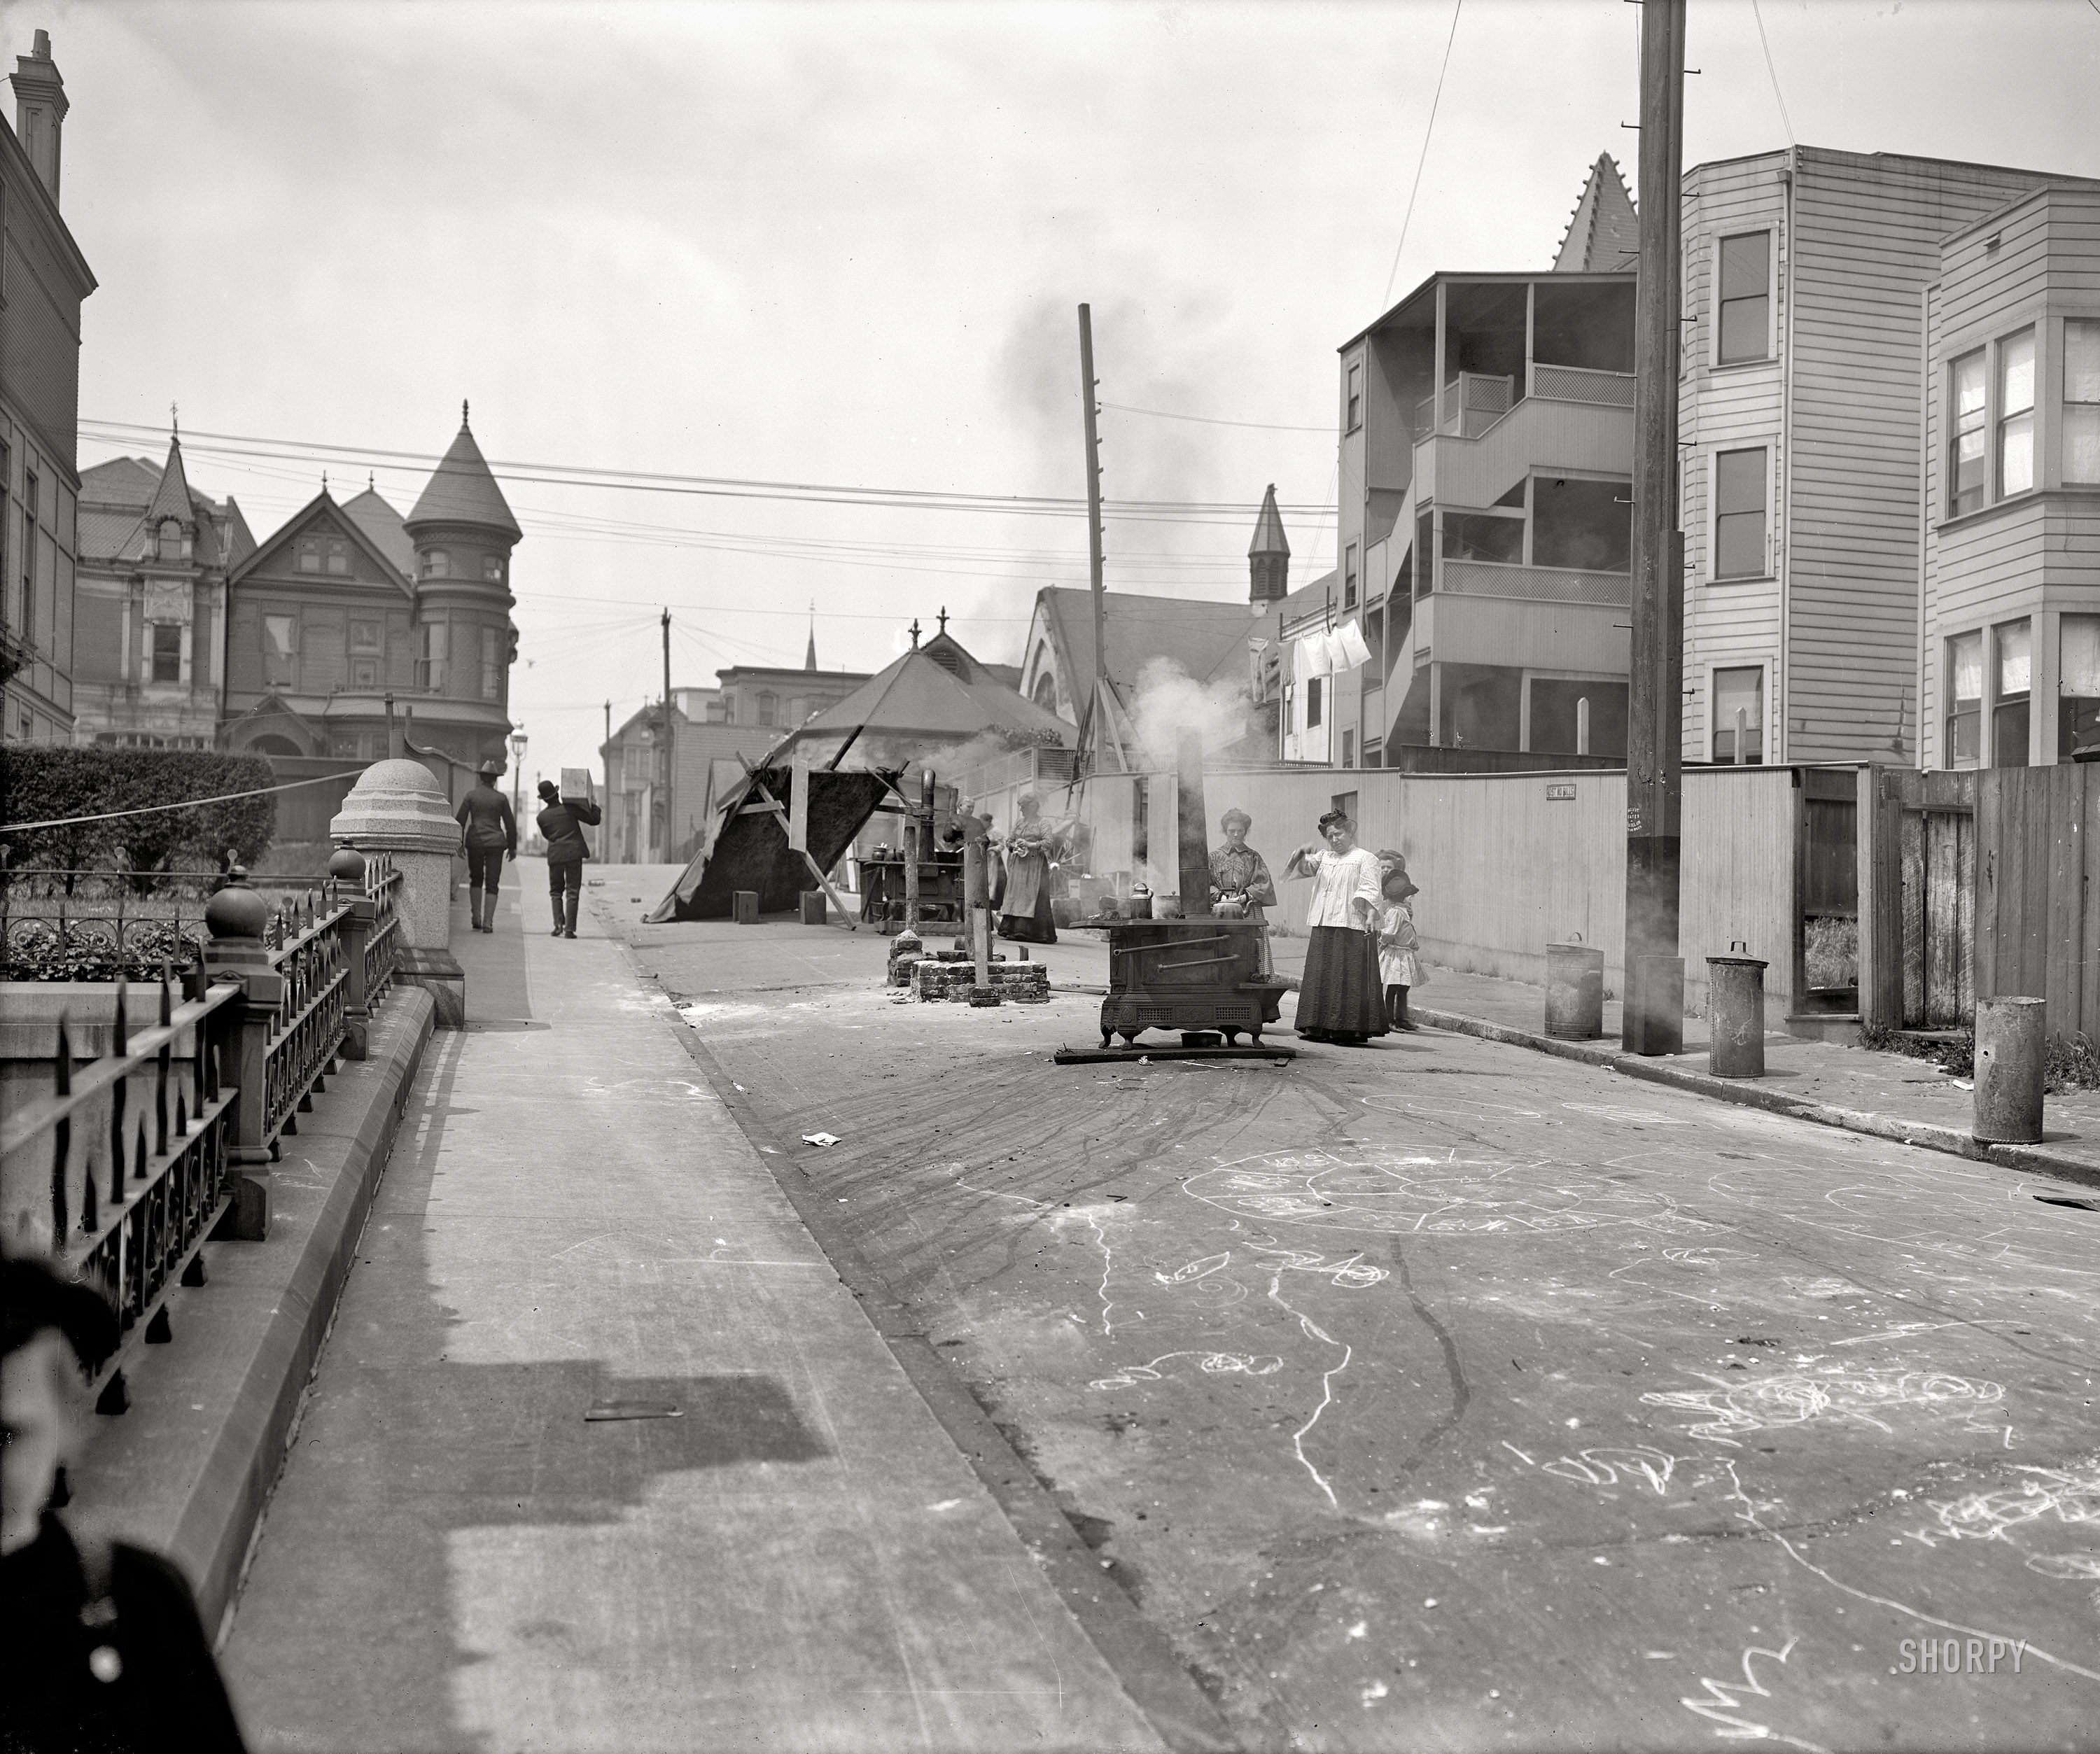 San Francisco, April 1906, after the earthquake and fire that leveled much of the city. "Cooking in the street." Detroit Publishing glass negative. View full size.